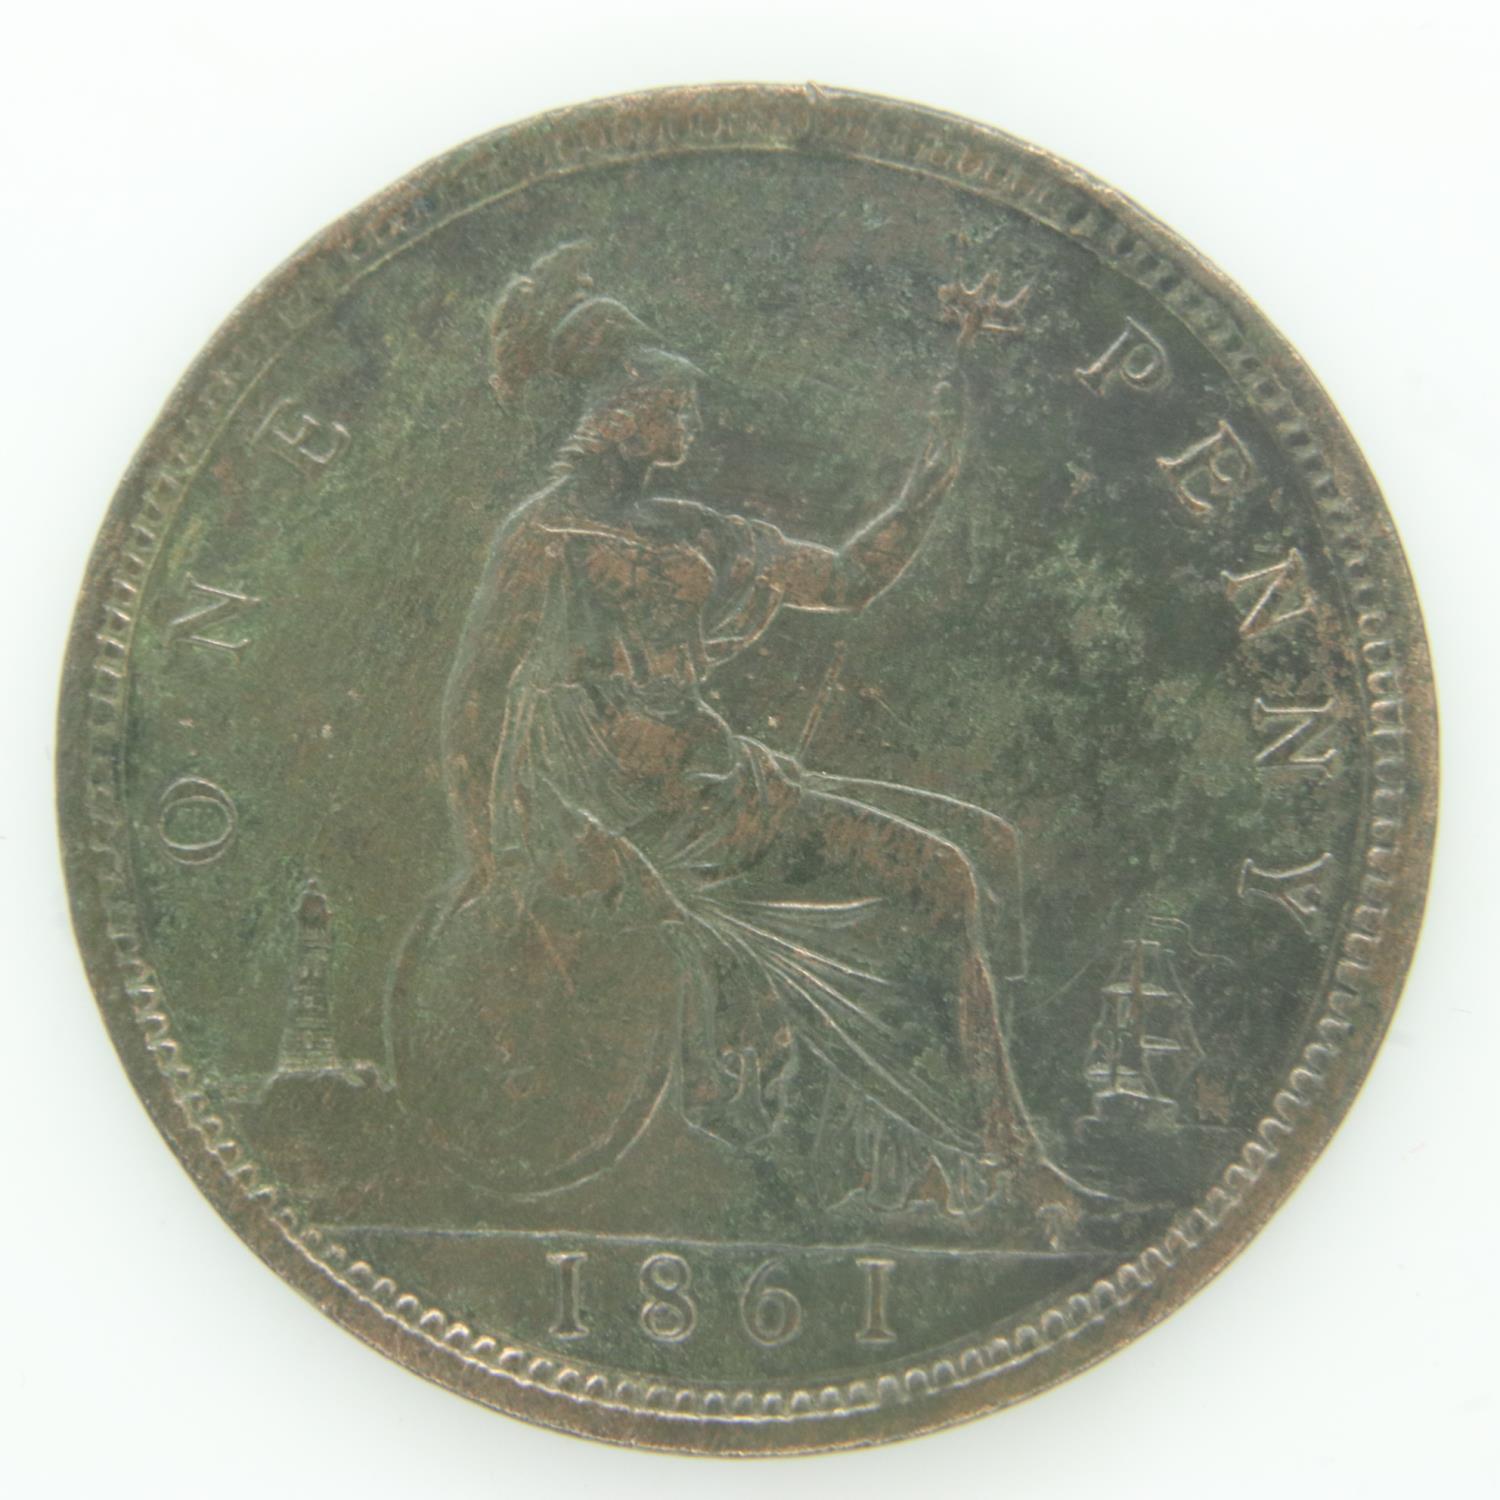 1861 penny of Queen Victoria - gVF grade. UK P&P Group 0 (£6+VAT for the first lot and £1+VAT for